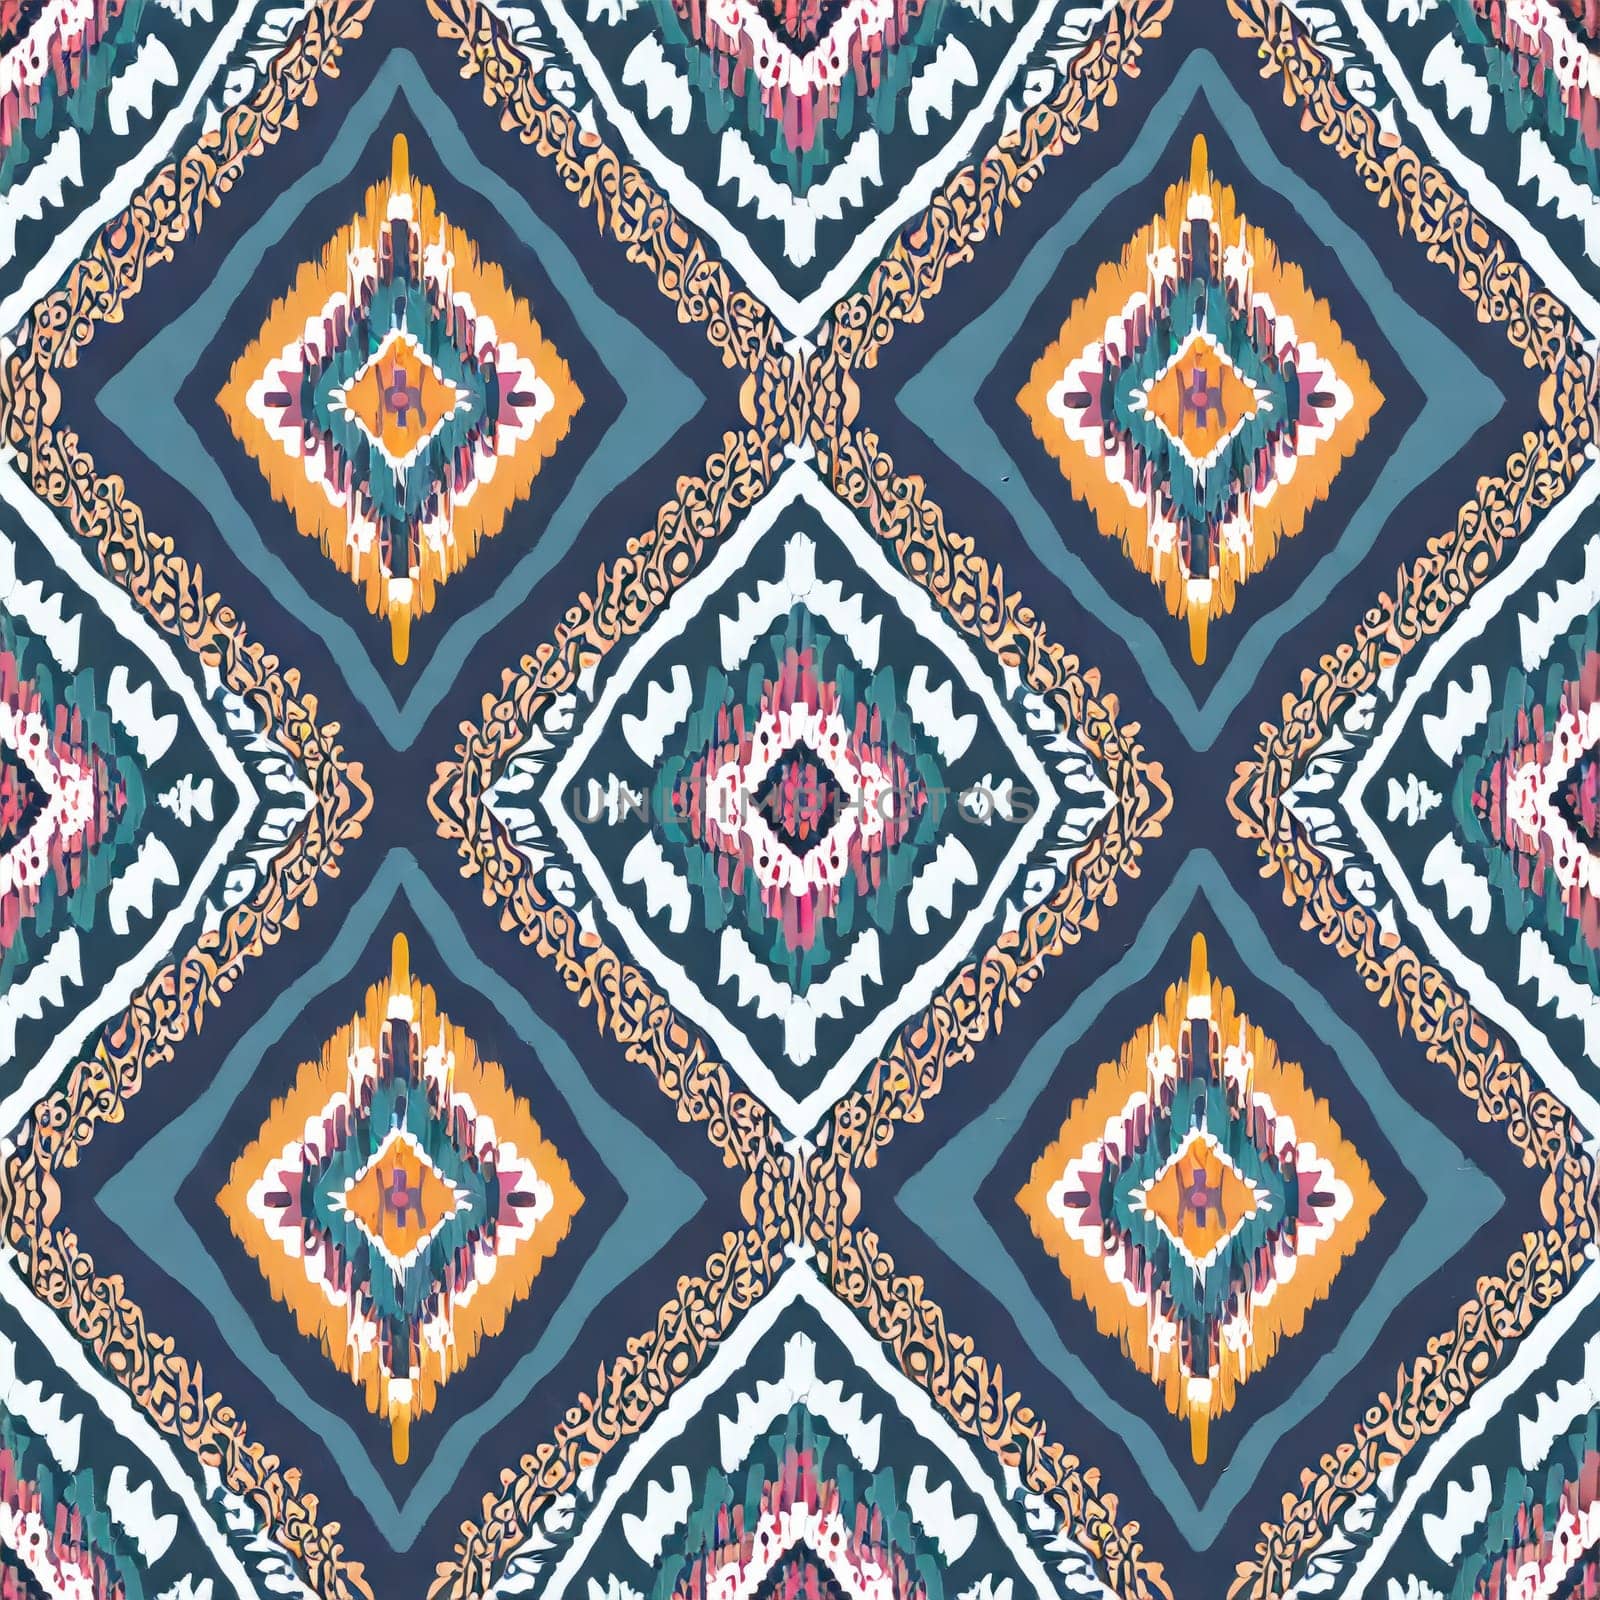 Ikat seamless pattern background Traditional pattern. Ikat Aztec tribal background. Design for the creation of this pattern using ikat by PeaceYAY